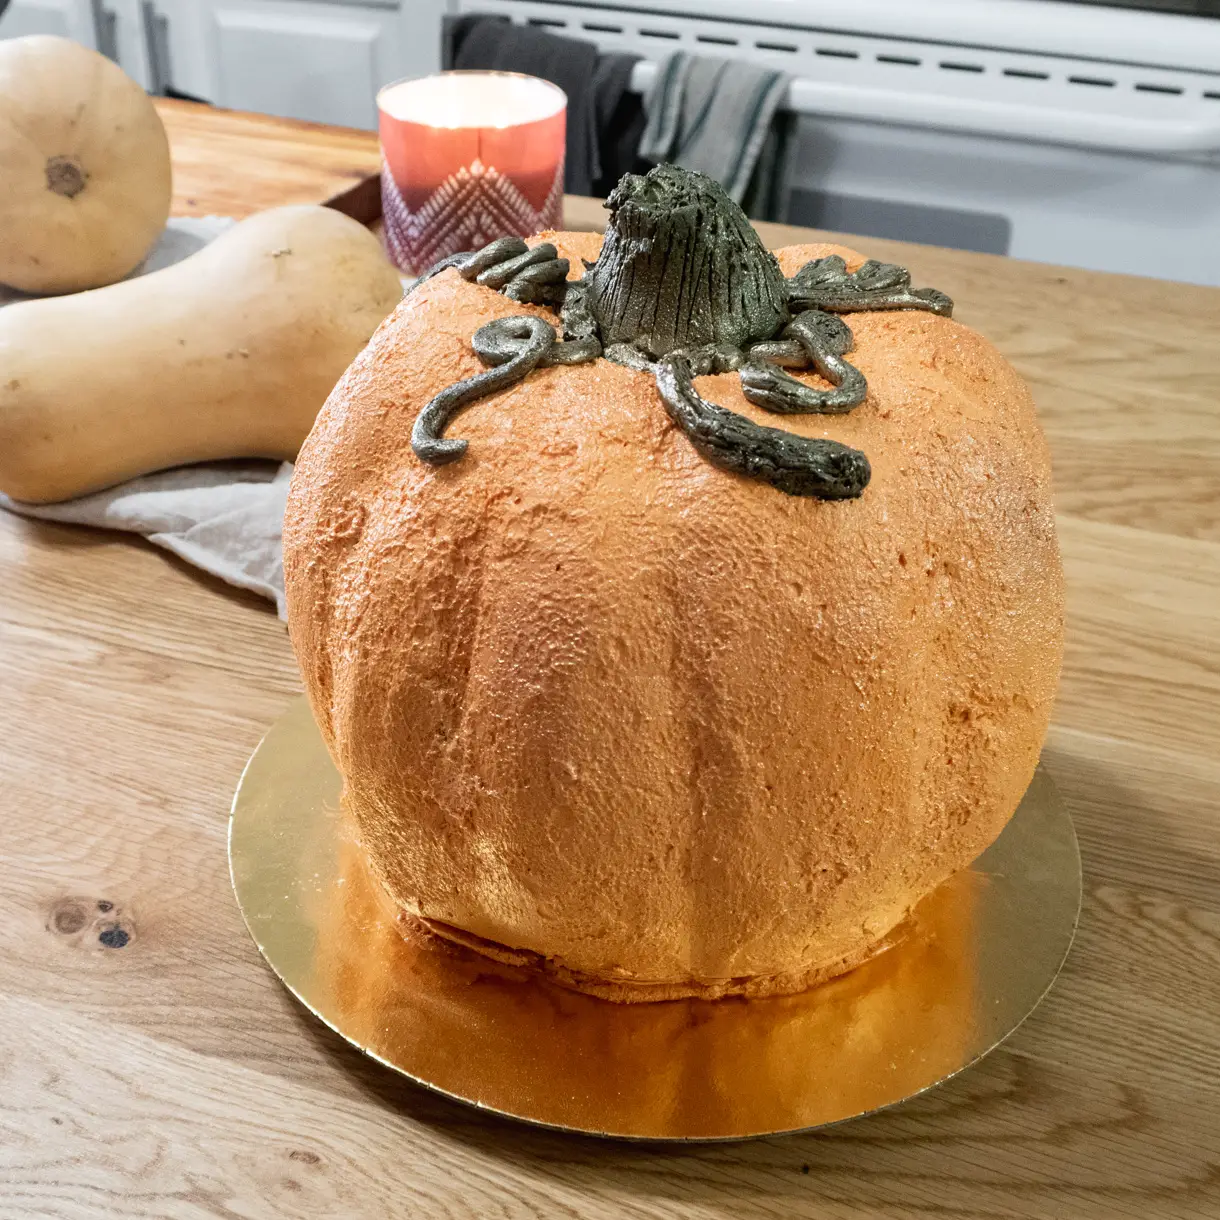 Pumpkin-shaped cake with butternut squash in the background.